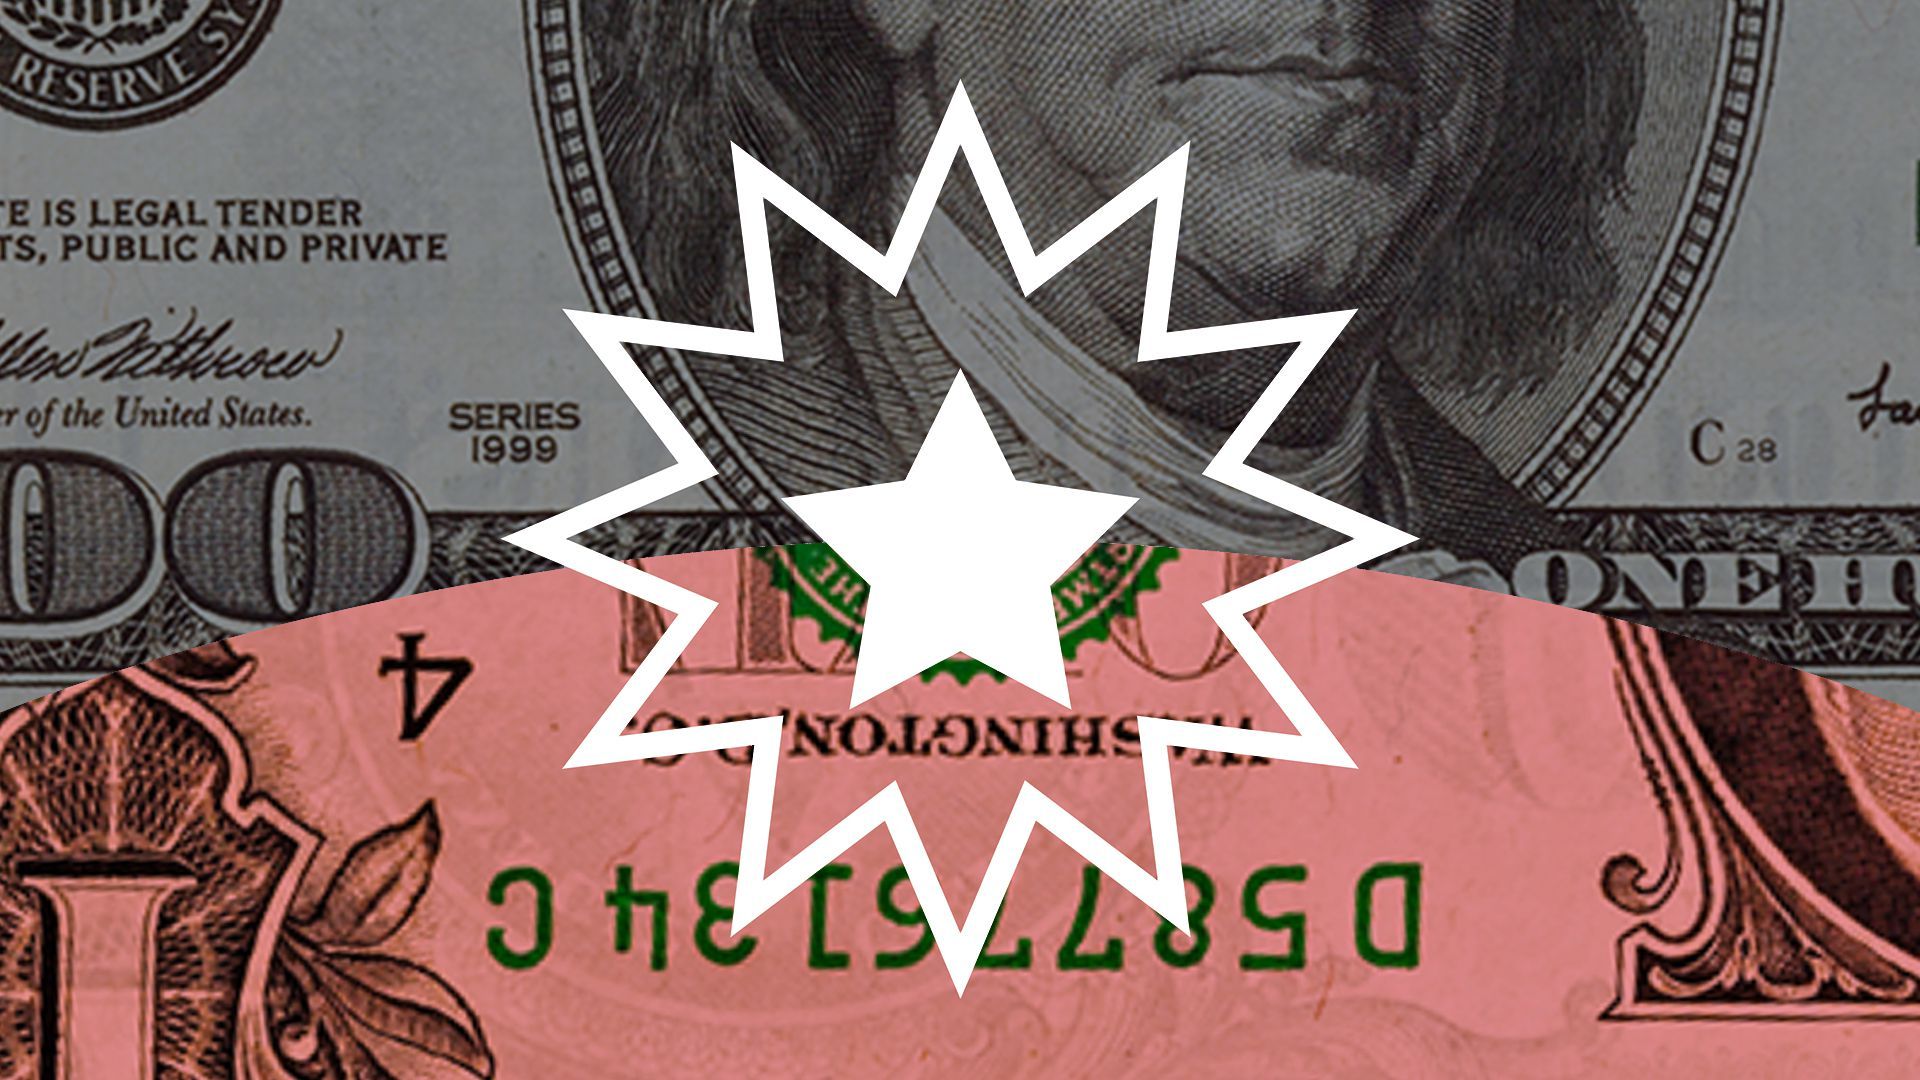 Illustration of the Juneteenth flag made from U.S. money 